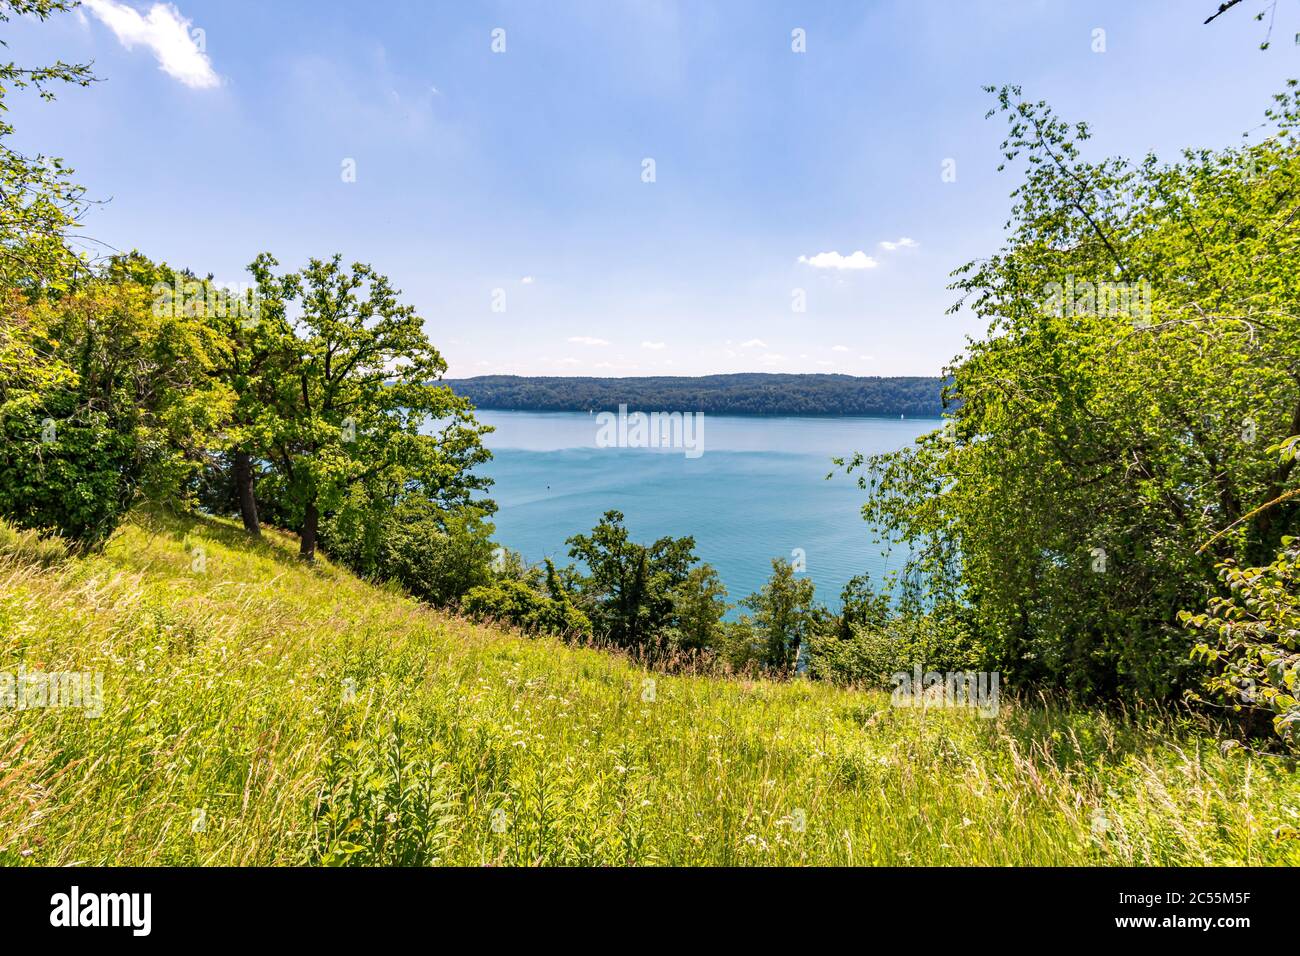 Fantastic hike near Sipplingen on Lake Constance with wonderful views and mysterious gorges Stock Photo